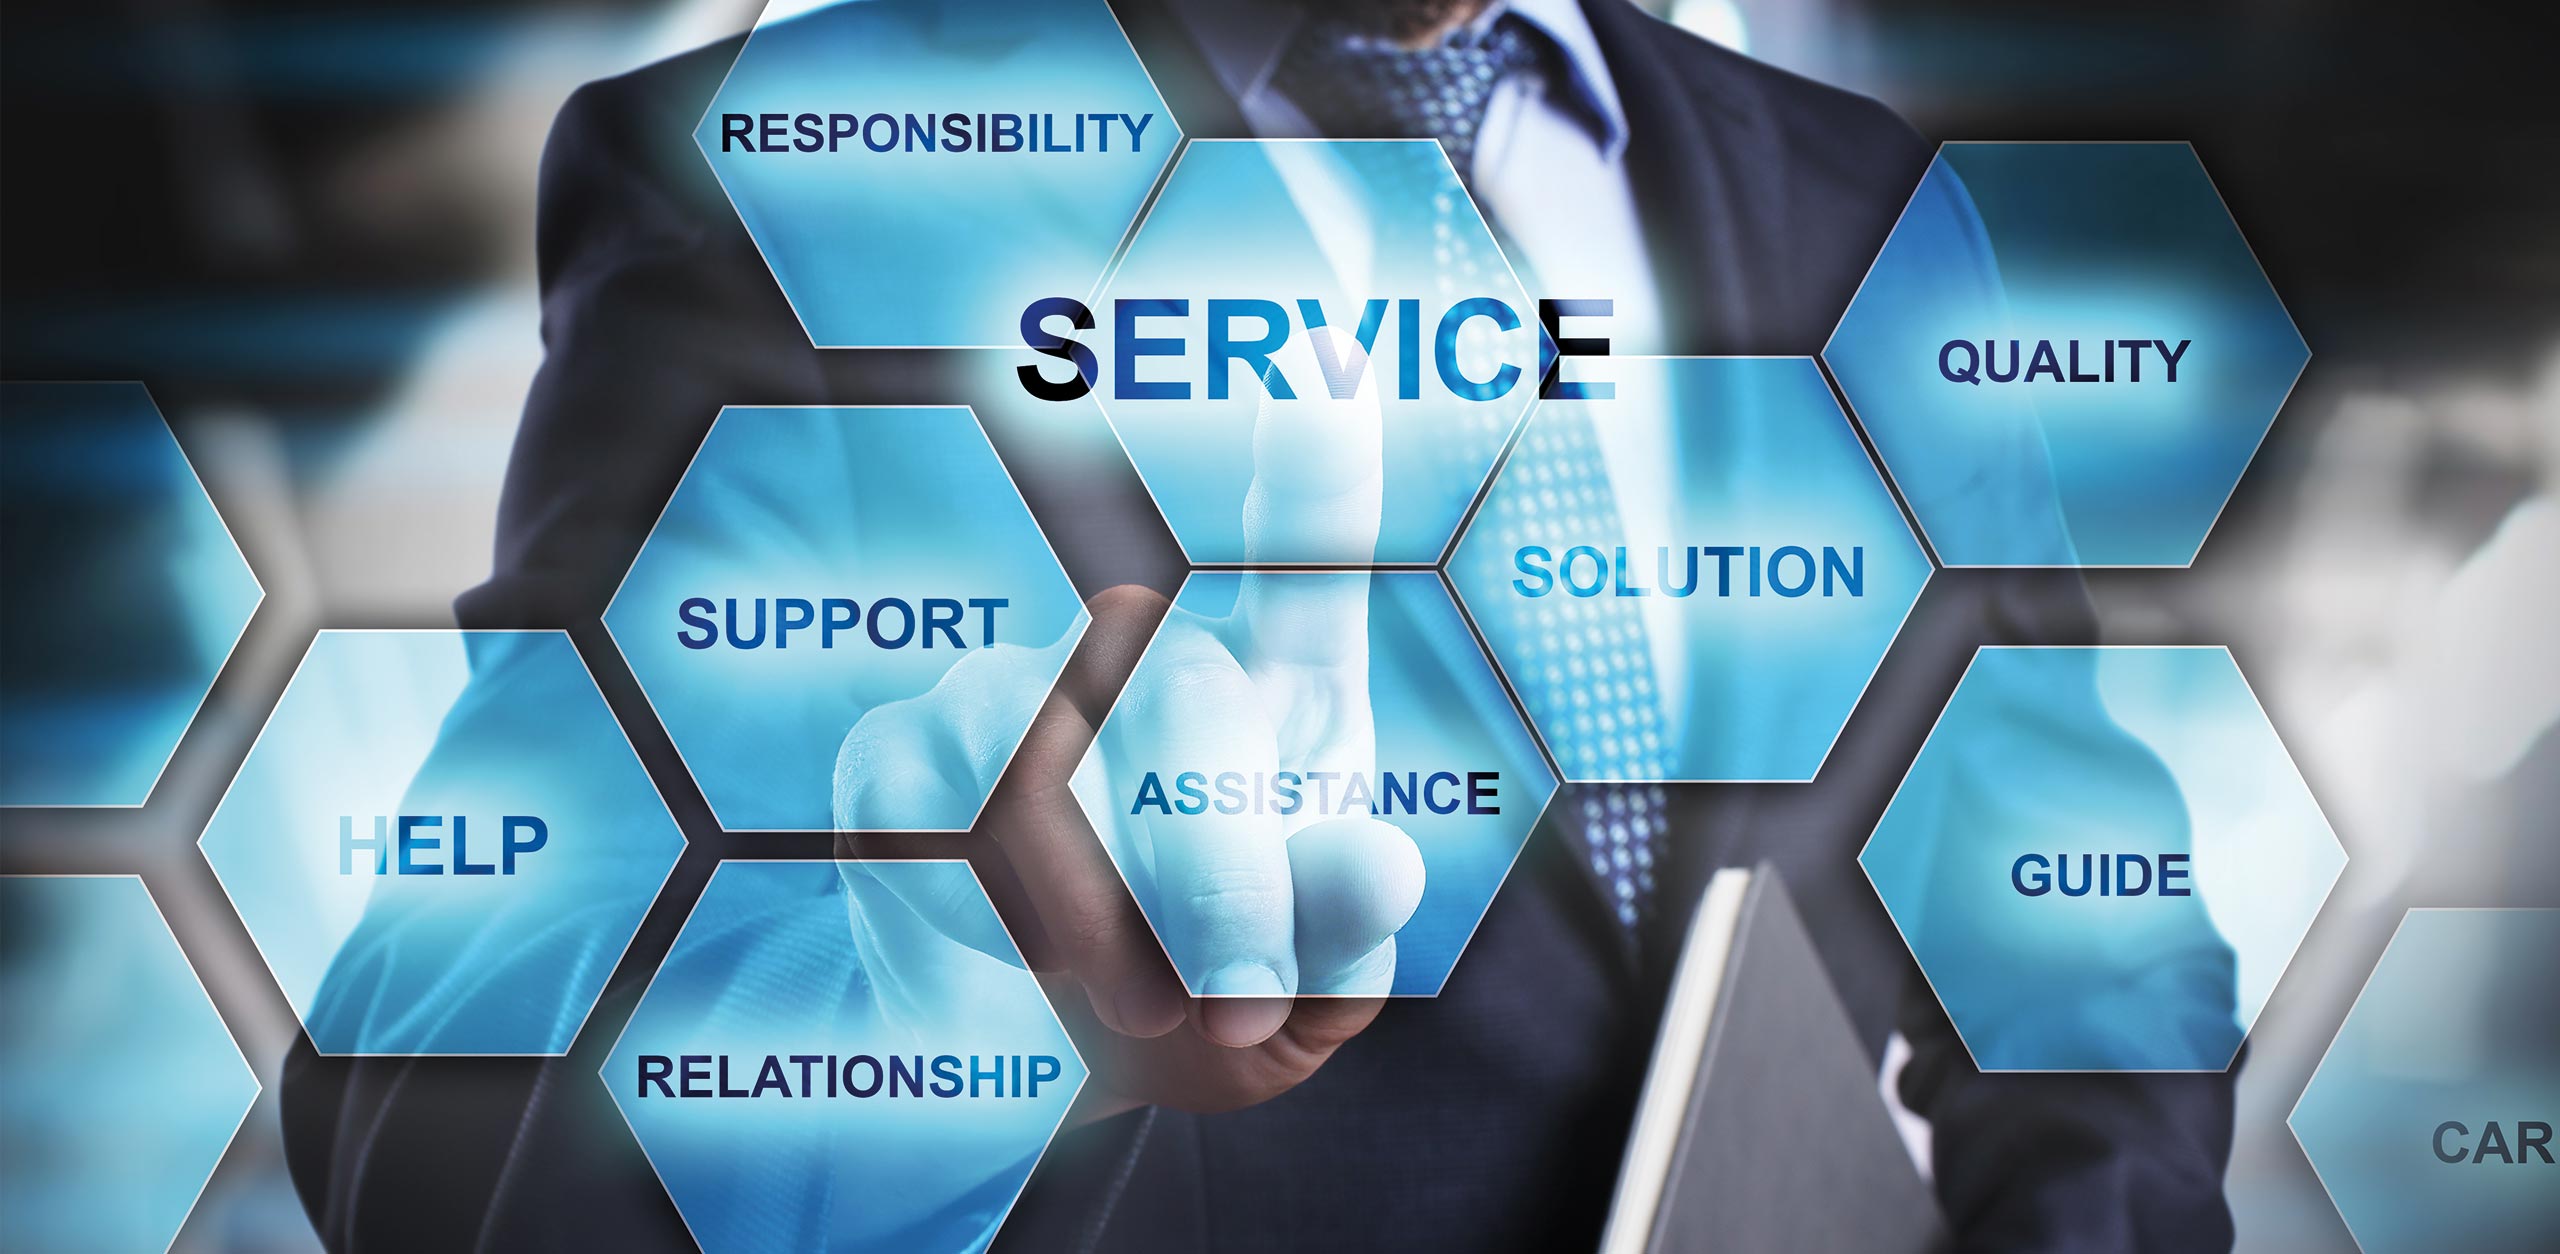 What are the Top Benefits of Managed IT Services